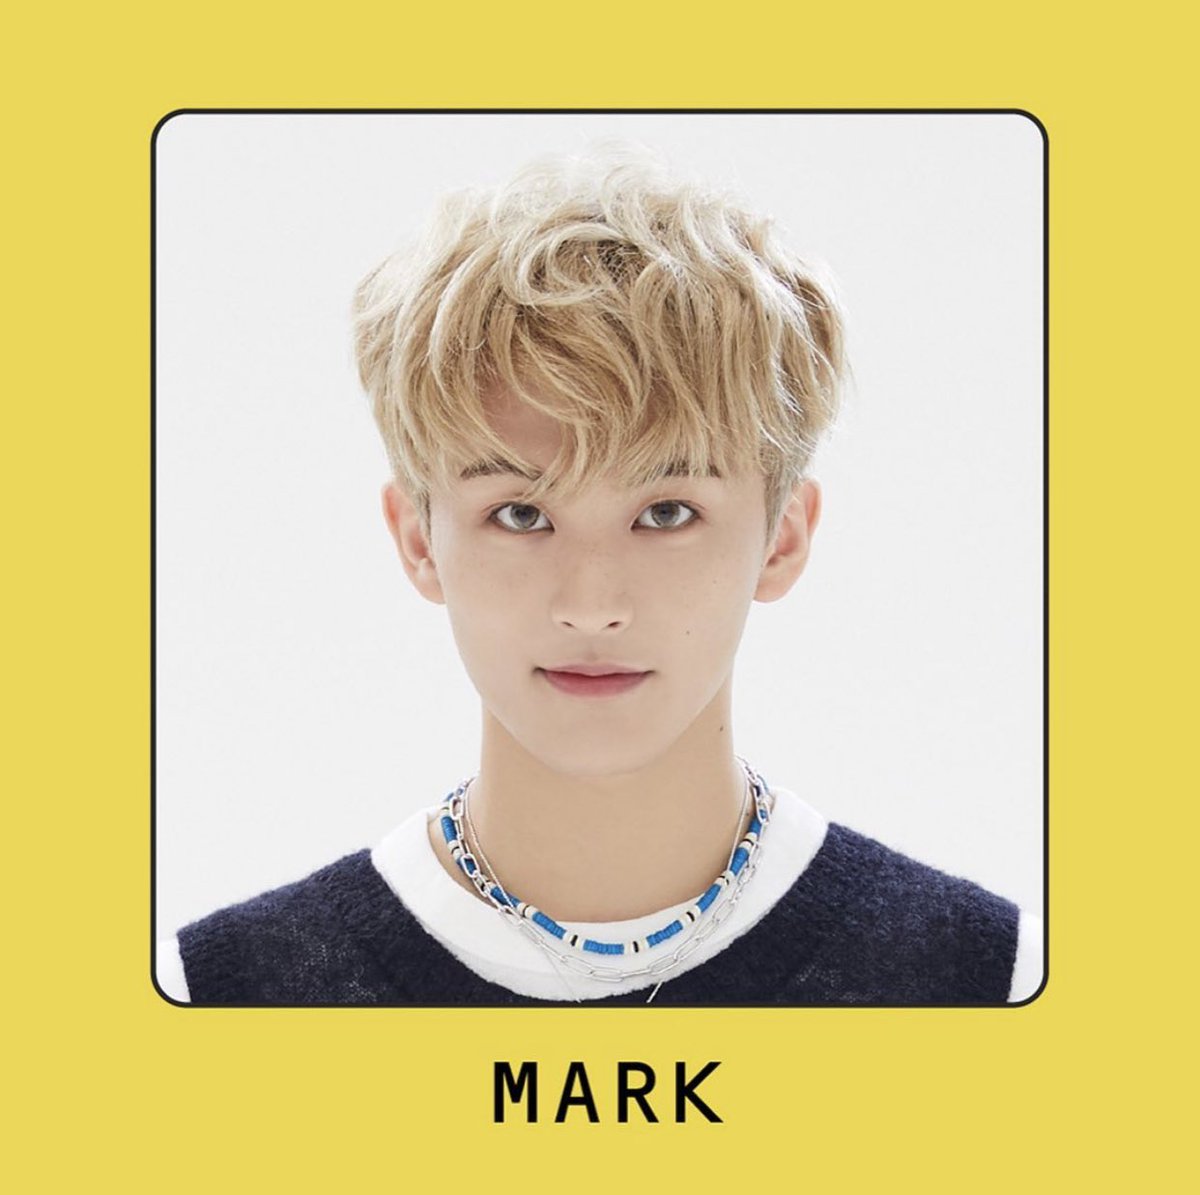 mark (마크)full name: mark lee/ lee minhyung (이민형)birthday: aug. 2, 1999 (leo)birthplace: toronto, canadaposition: main rap, main dance, sub vocal, face of the groupheight: 175 cm (5’9”)trainee since: 2012 (4 years)units: nct u, nct 127, nct dreamstans: markzen